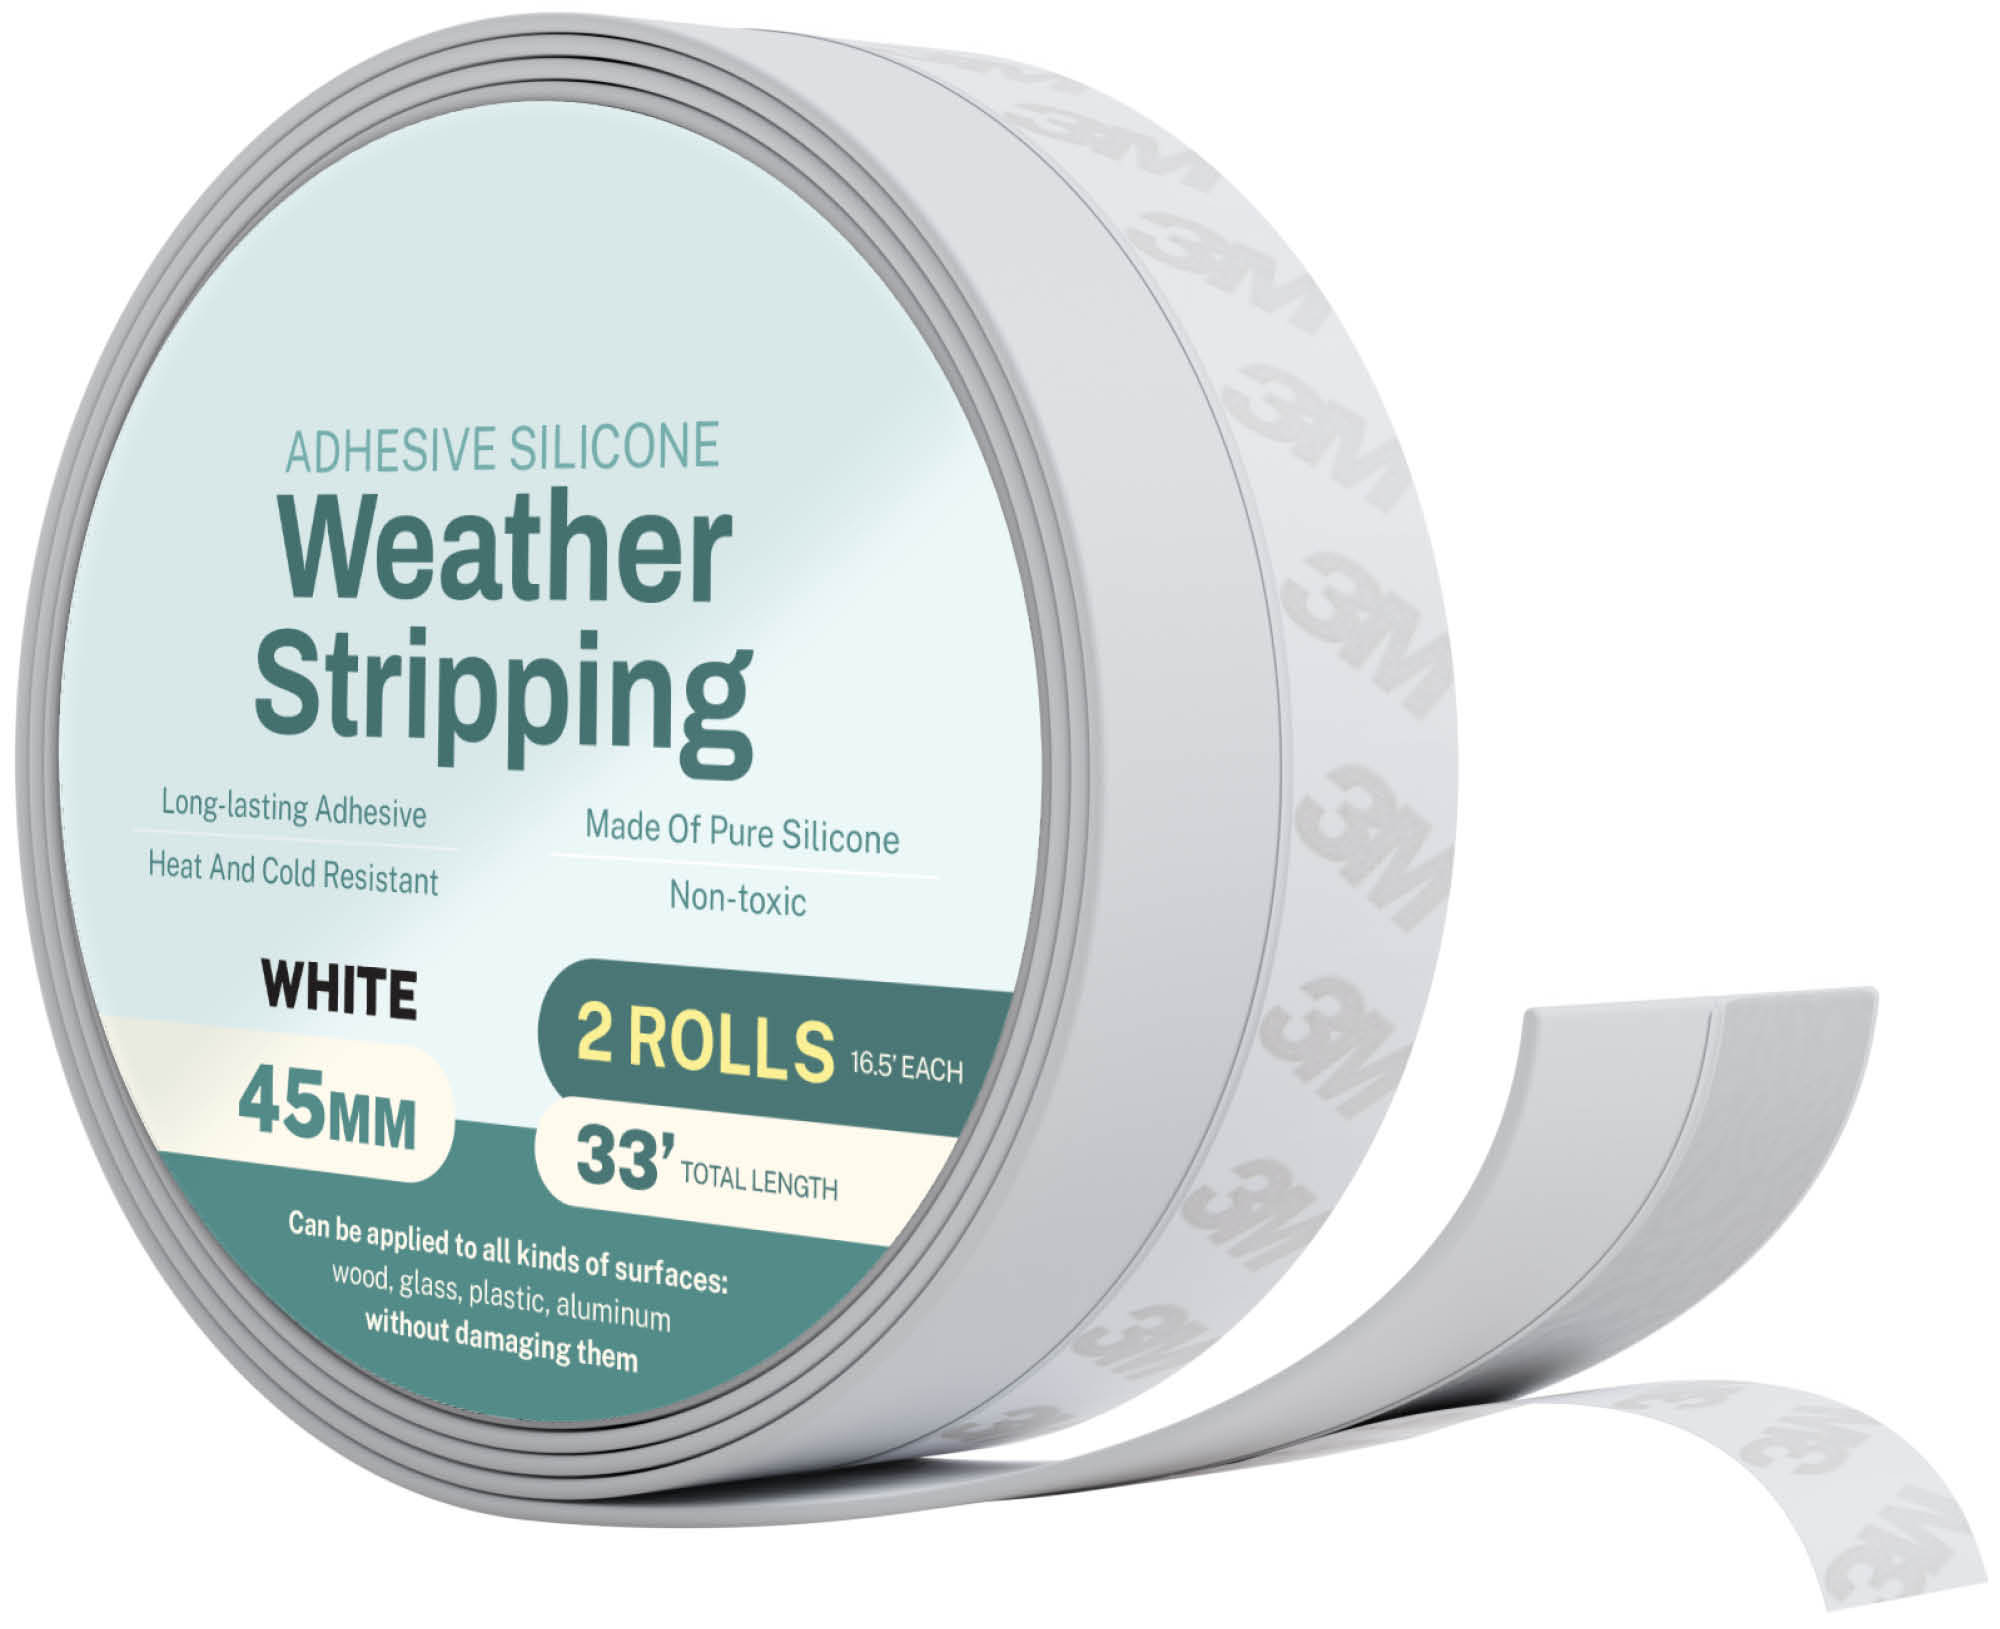 Home Intuition Foam Weather Stripping - 33 ft Foam Strips with Adhesive - Insulation Foam Door Weather Stripping Door Seal & Window Seal - Weatherstri